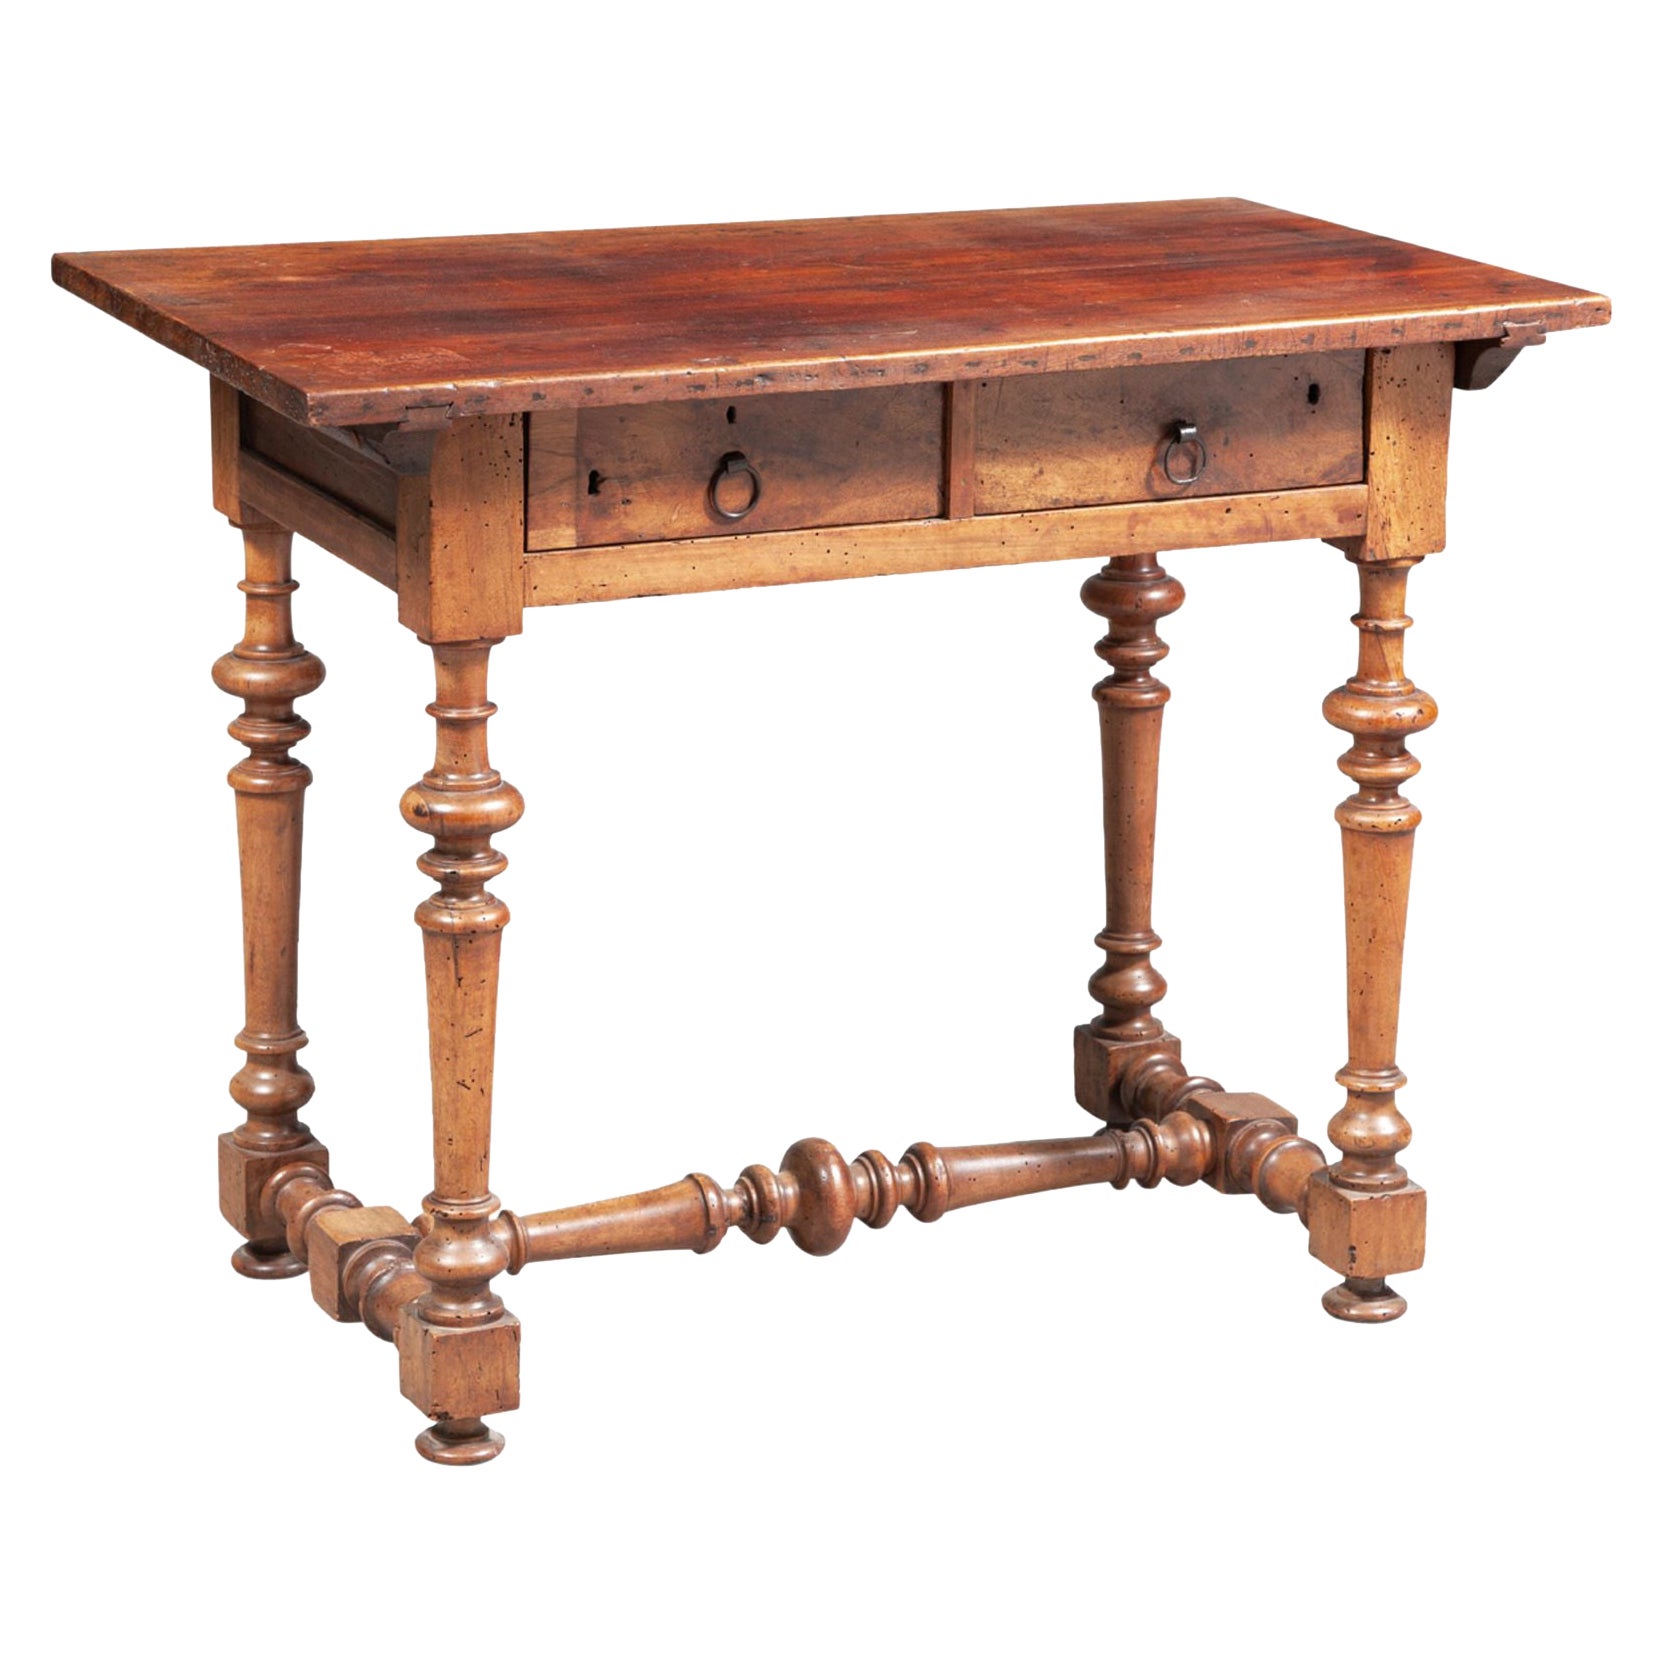 17th C. Provencal Hand Carved Antique Side Table Walnut Desk Drawers Farm LA CA For Sale